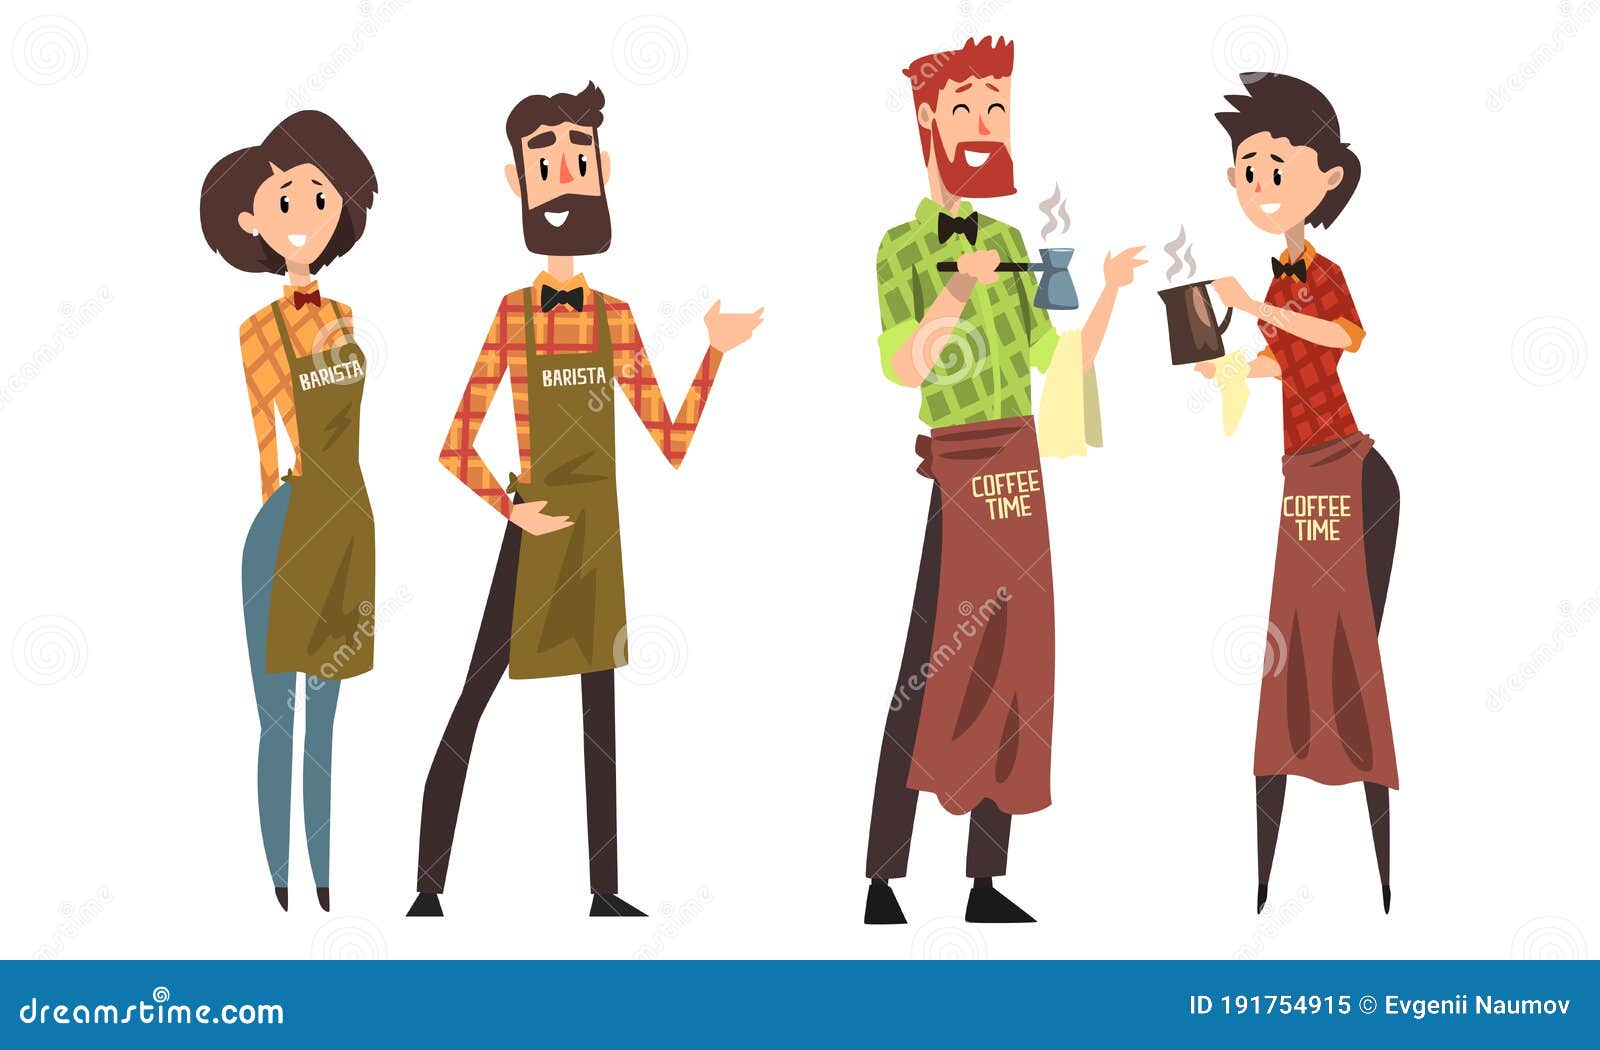 barista characters set, cafe staff in uniform making coffee cartoon style  